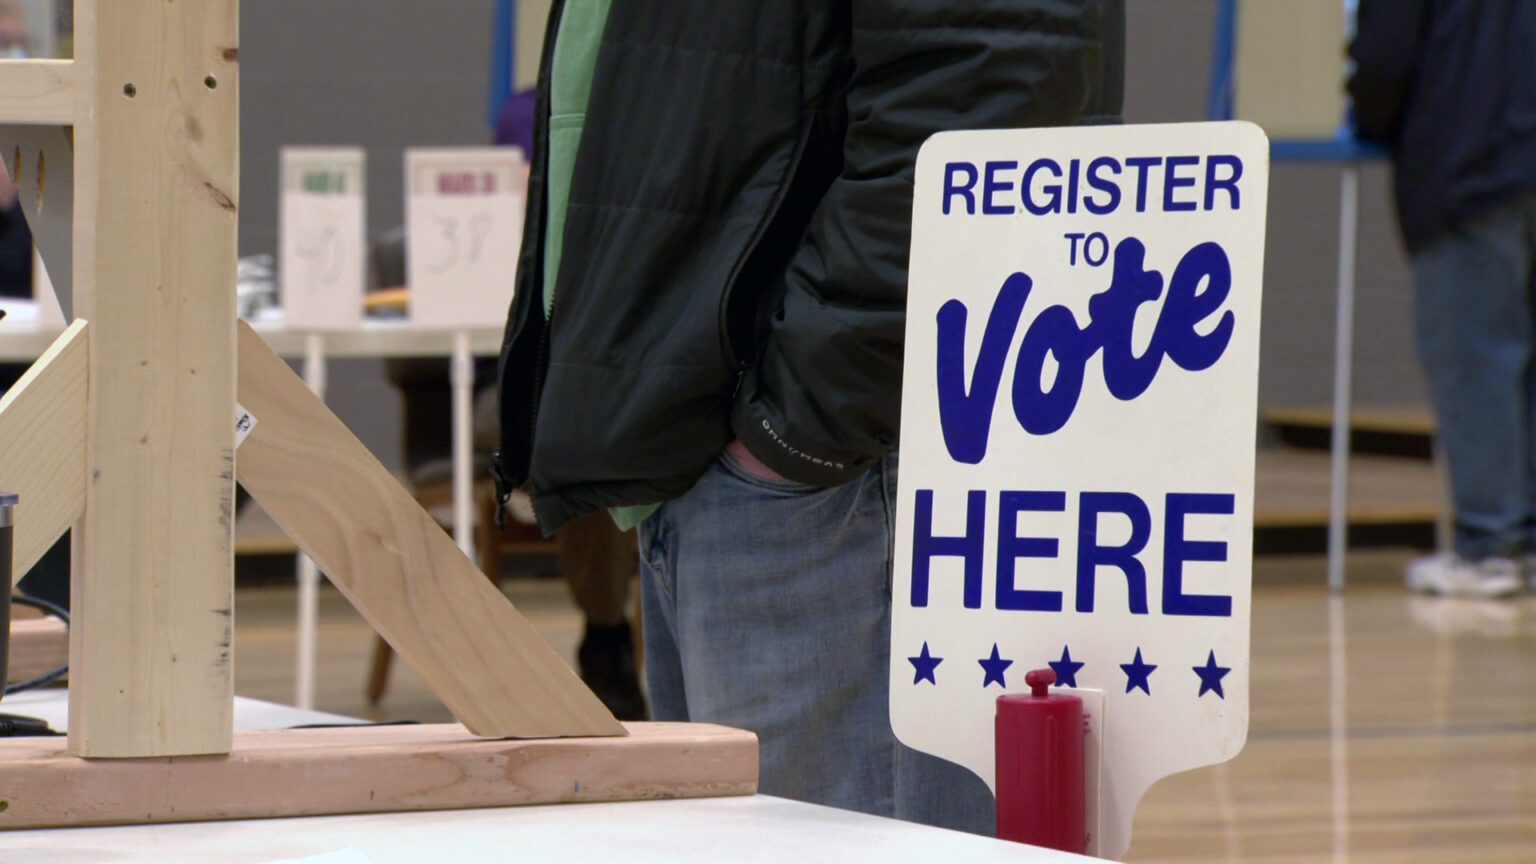 A sign reading Register to Vote Here stands next to a table with a wood-framed physical distancing divider and one person standing next to it, with tables, signs and other people standing in the background.